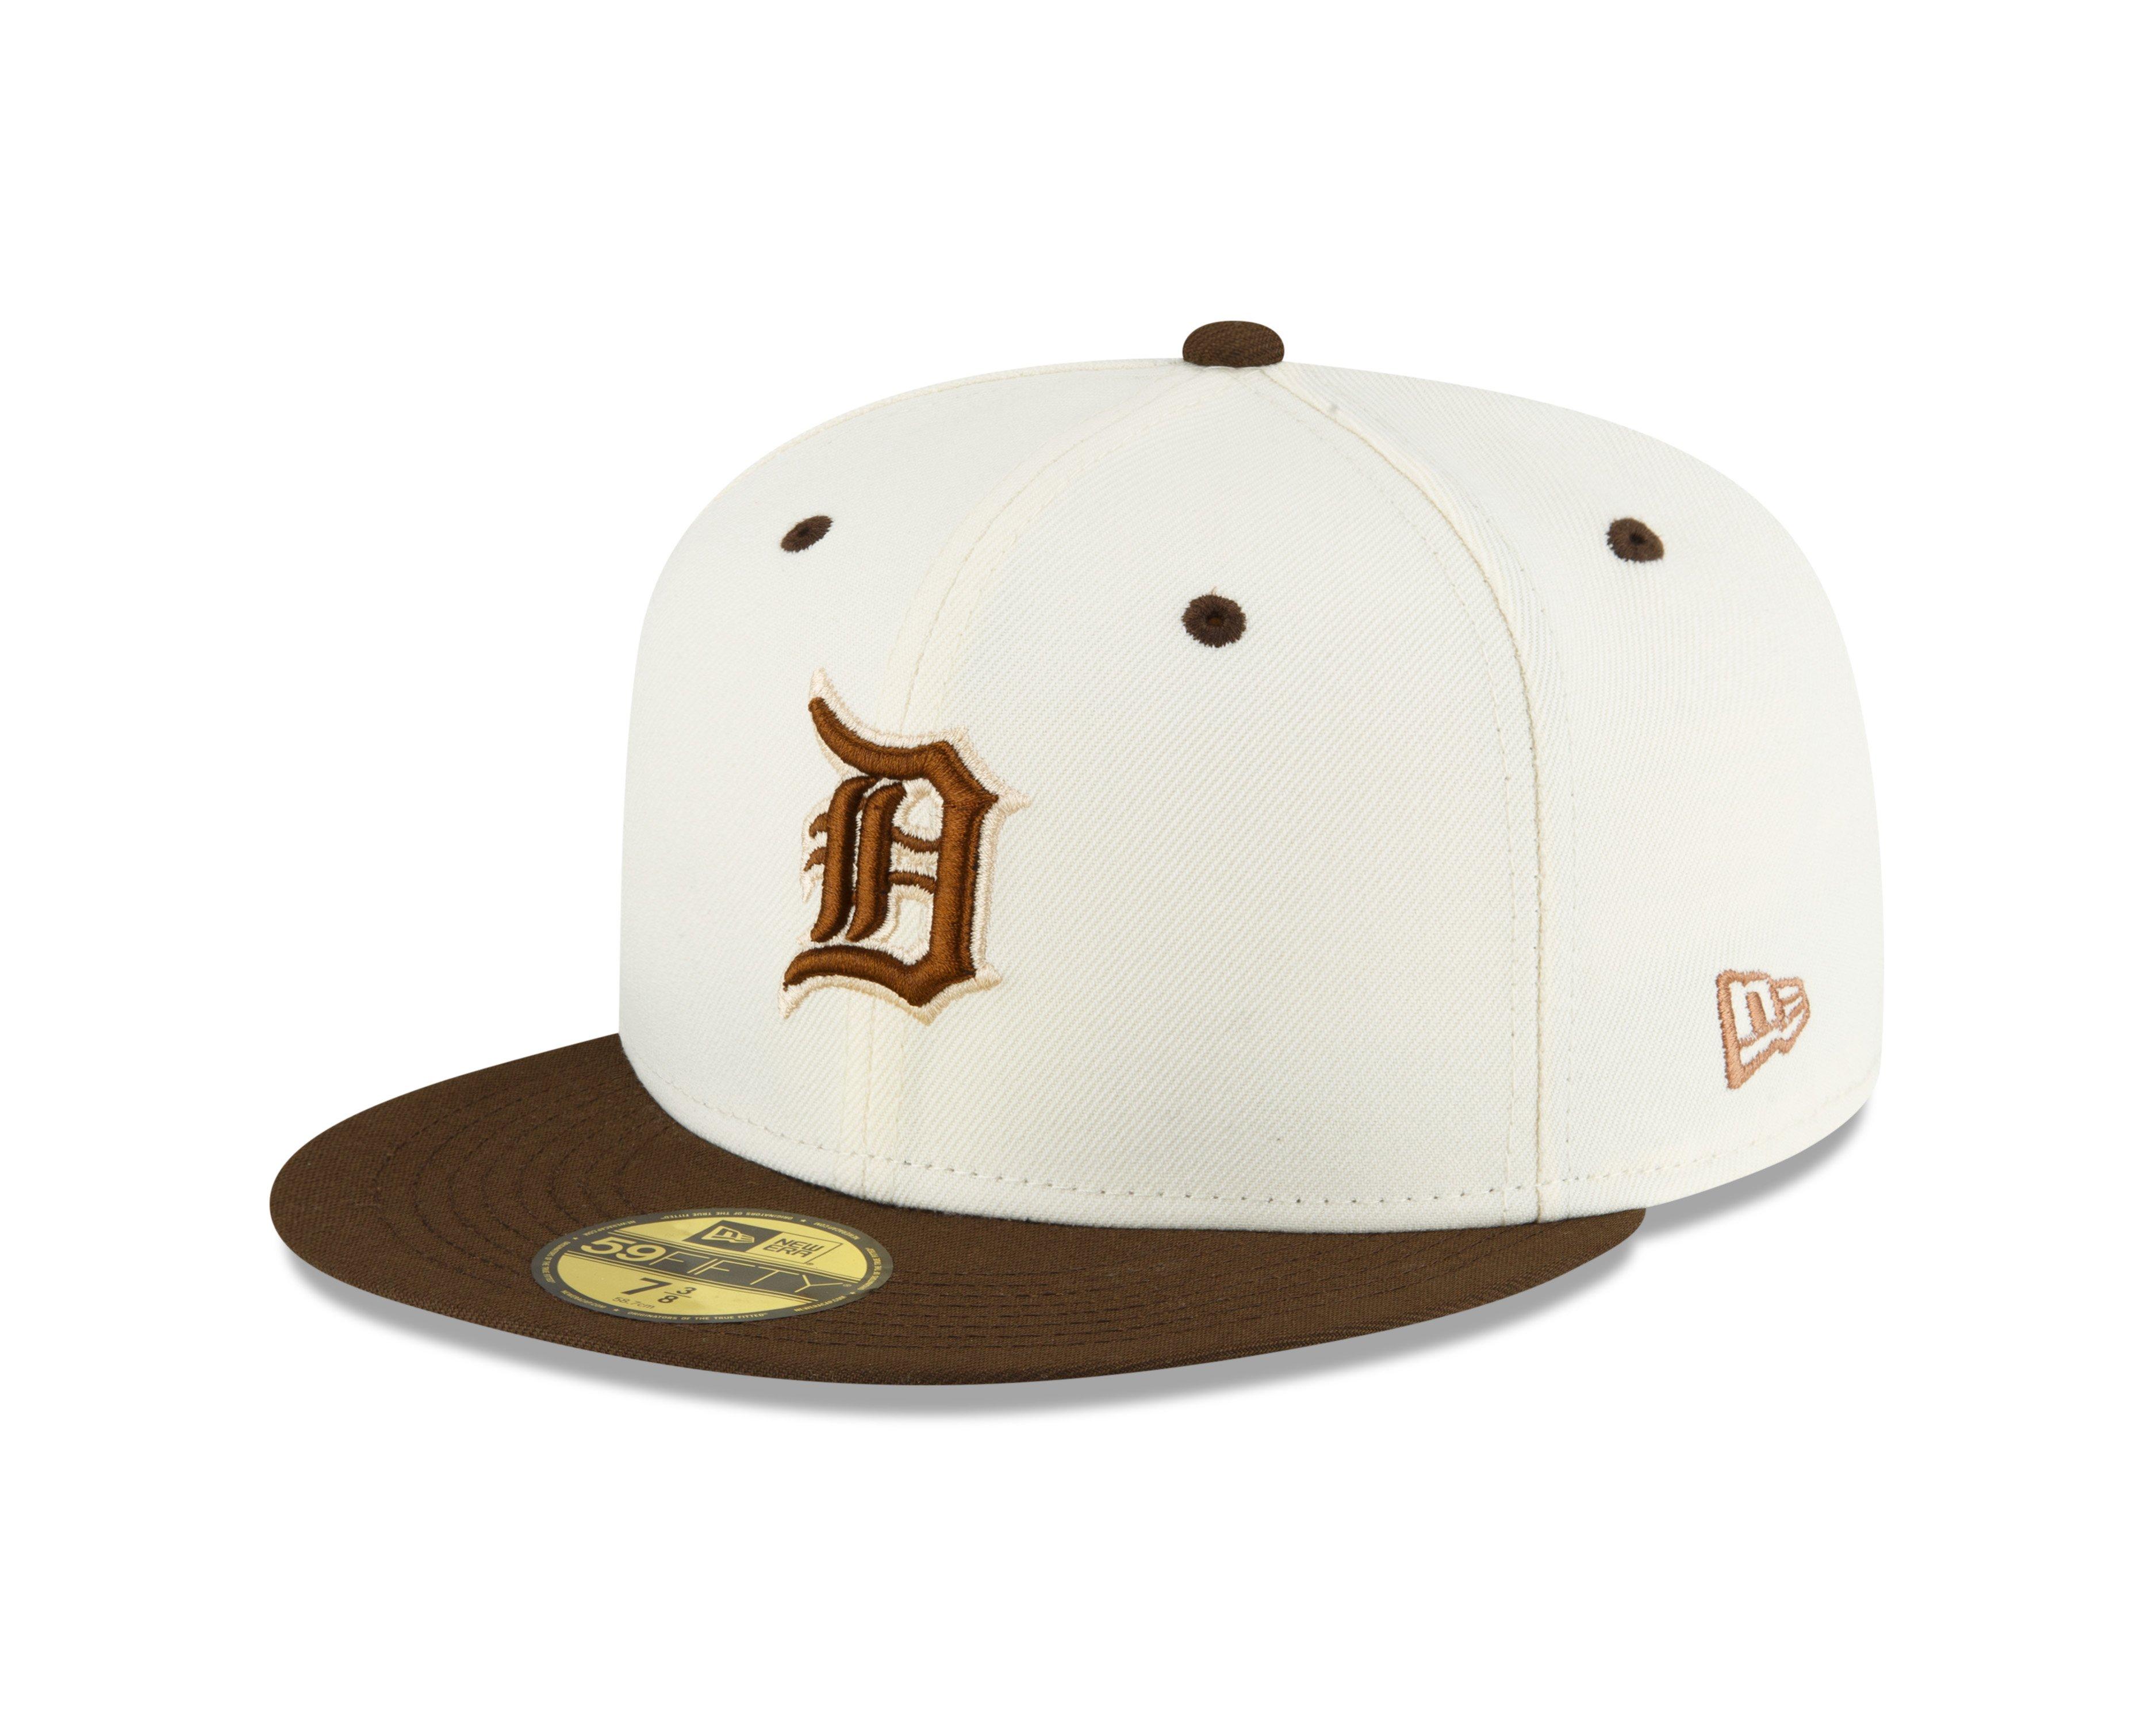 New Era 59Fifty Authentic Collection Detroit Tigers Home Hat